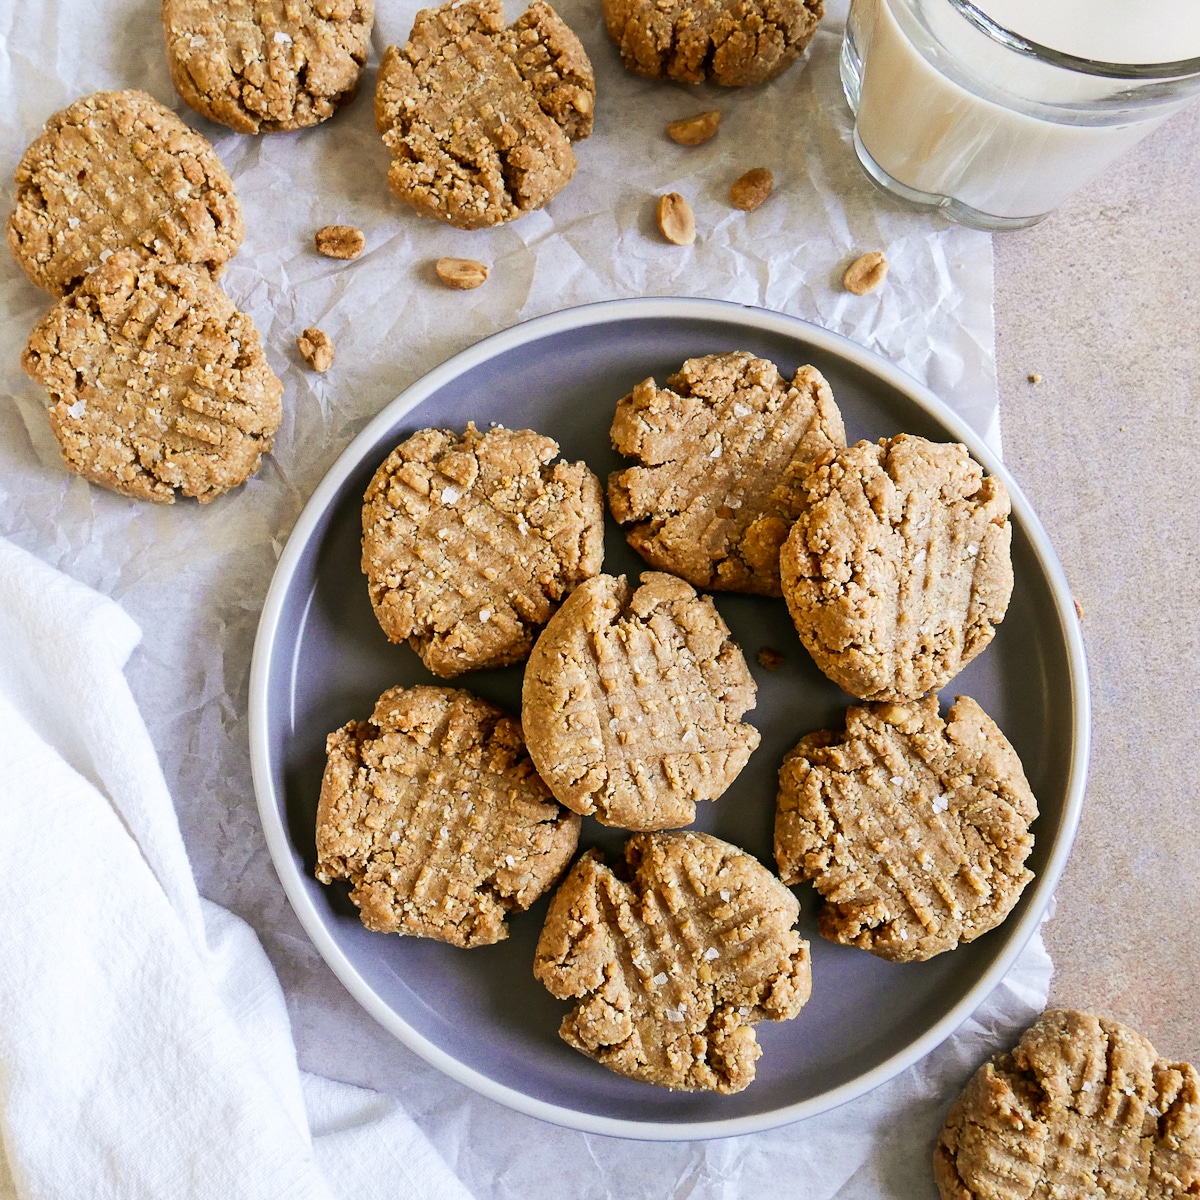 almond flour peanut butter cookies arranged on a gray plate with glass of milk.